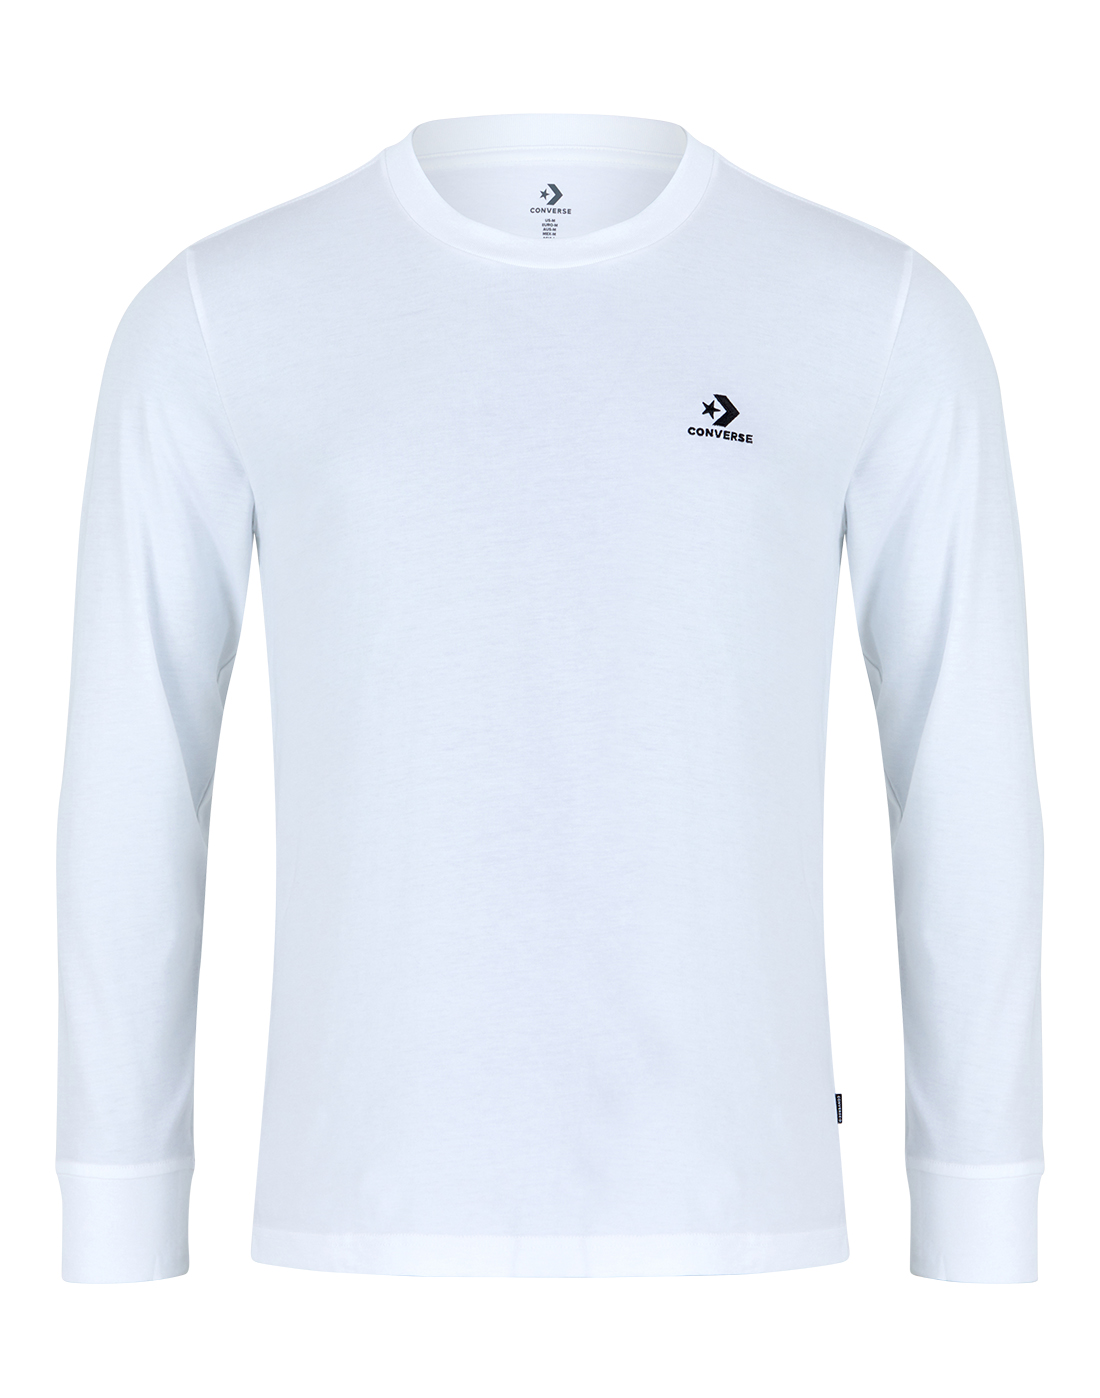 Converse Mens Embroidered Star Long Sleeved T-Shirt - White | Life Style  Sports EU